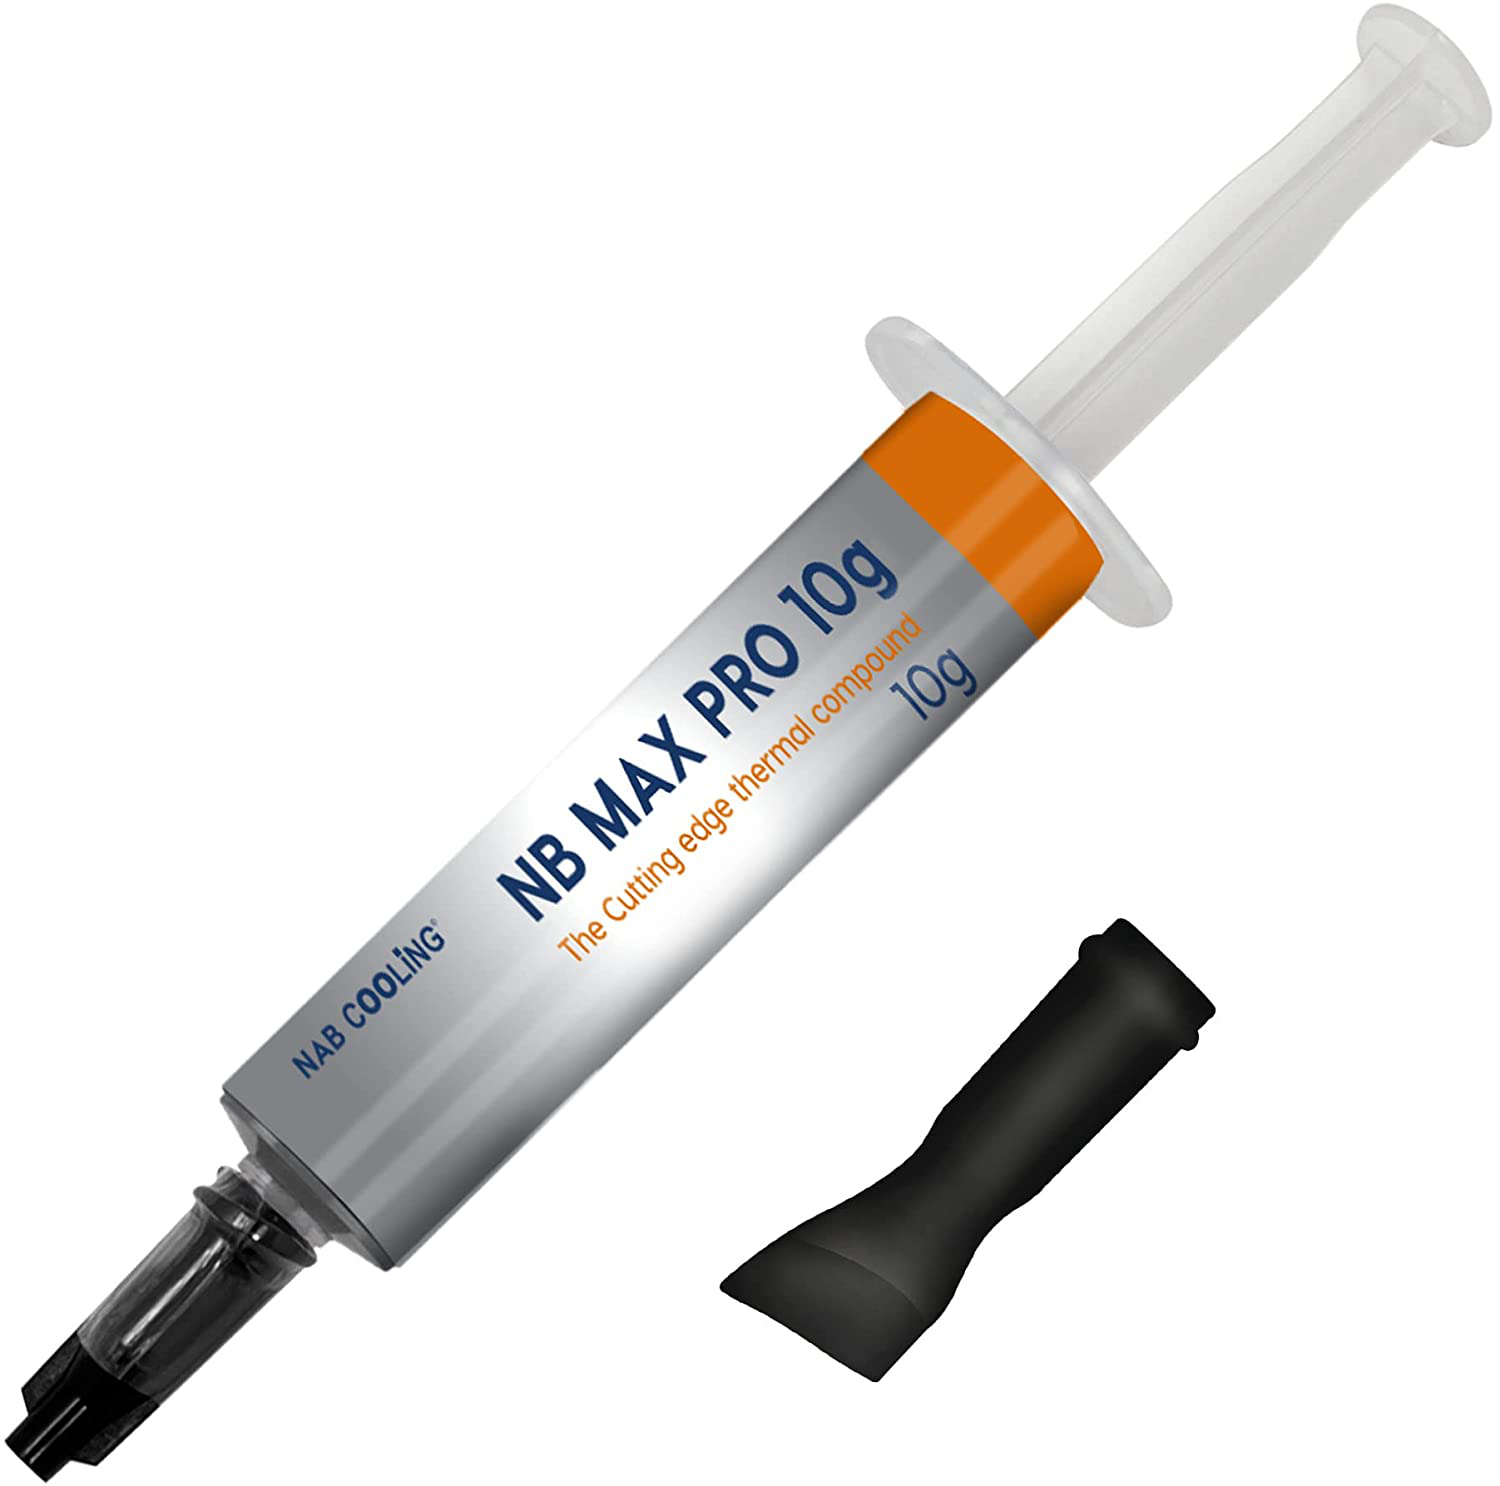 Nab Cooling Thermal Compound Paste for Heatsink 3.5G Maximum Thermal Conductivity, High Density, Easy Application Bonus Spatula, Noncorrosive (3.5G)